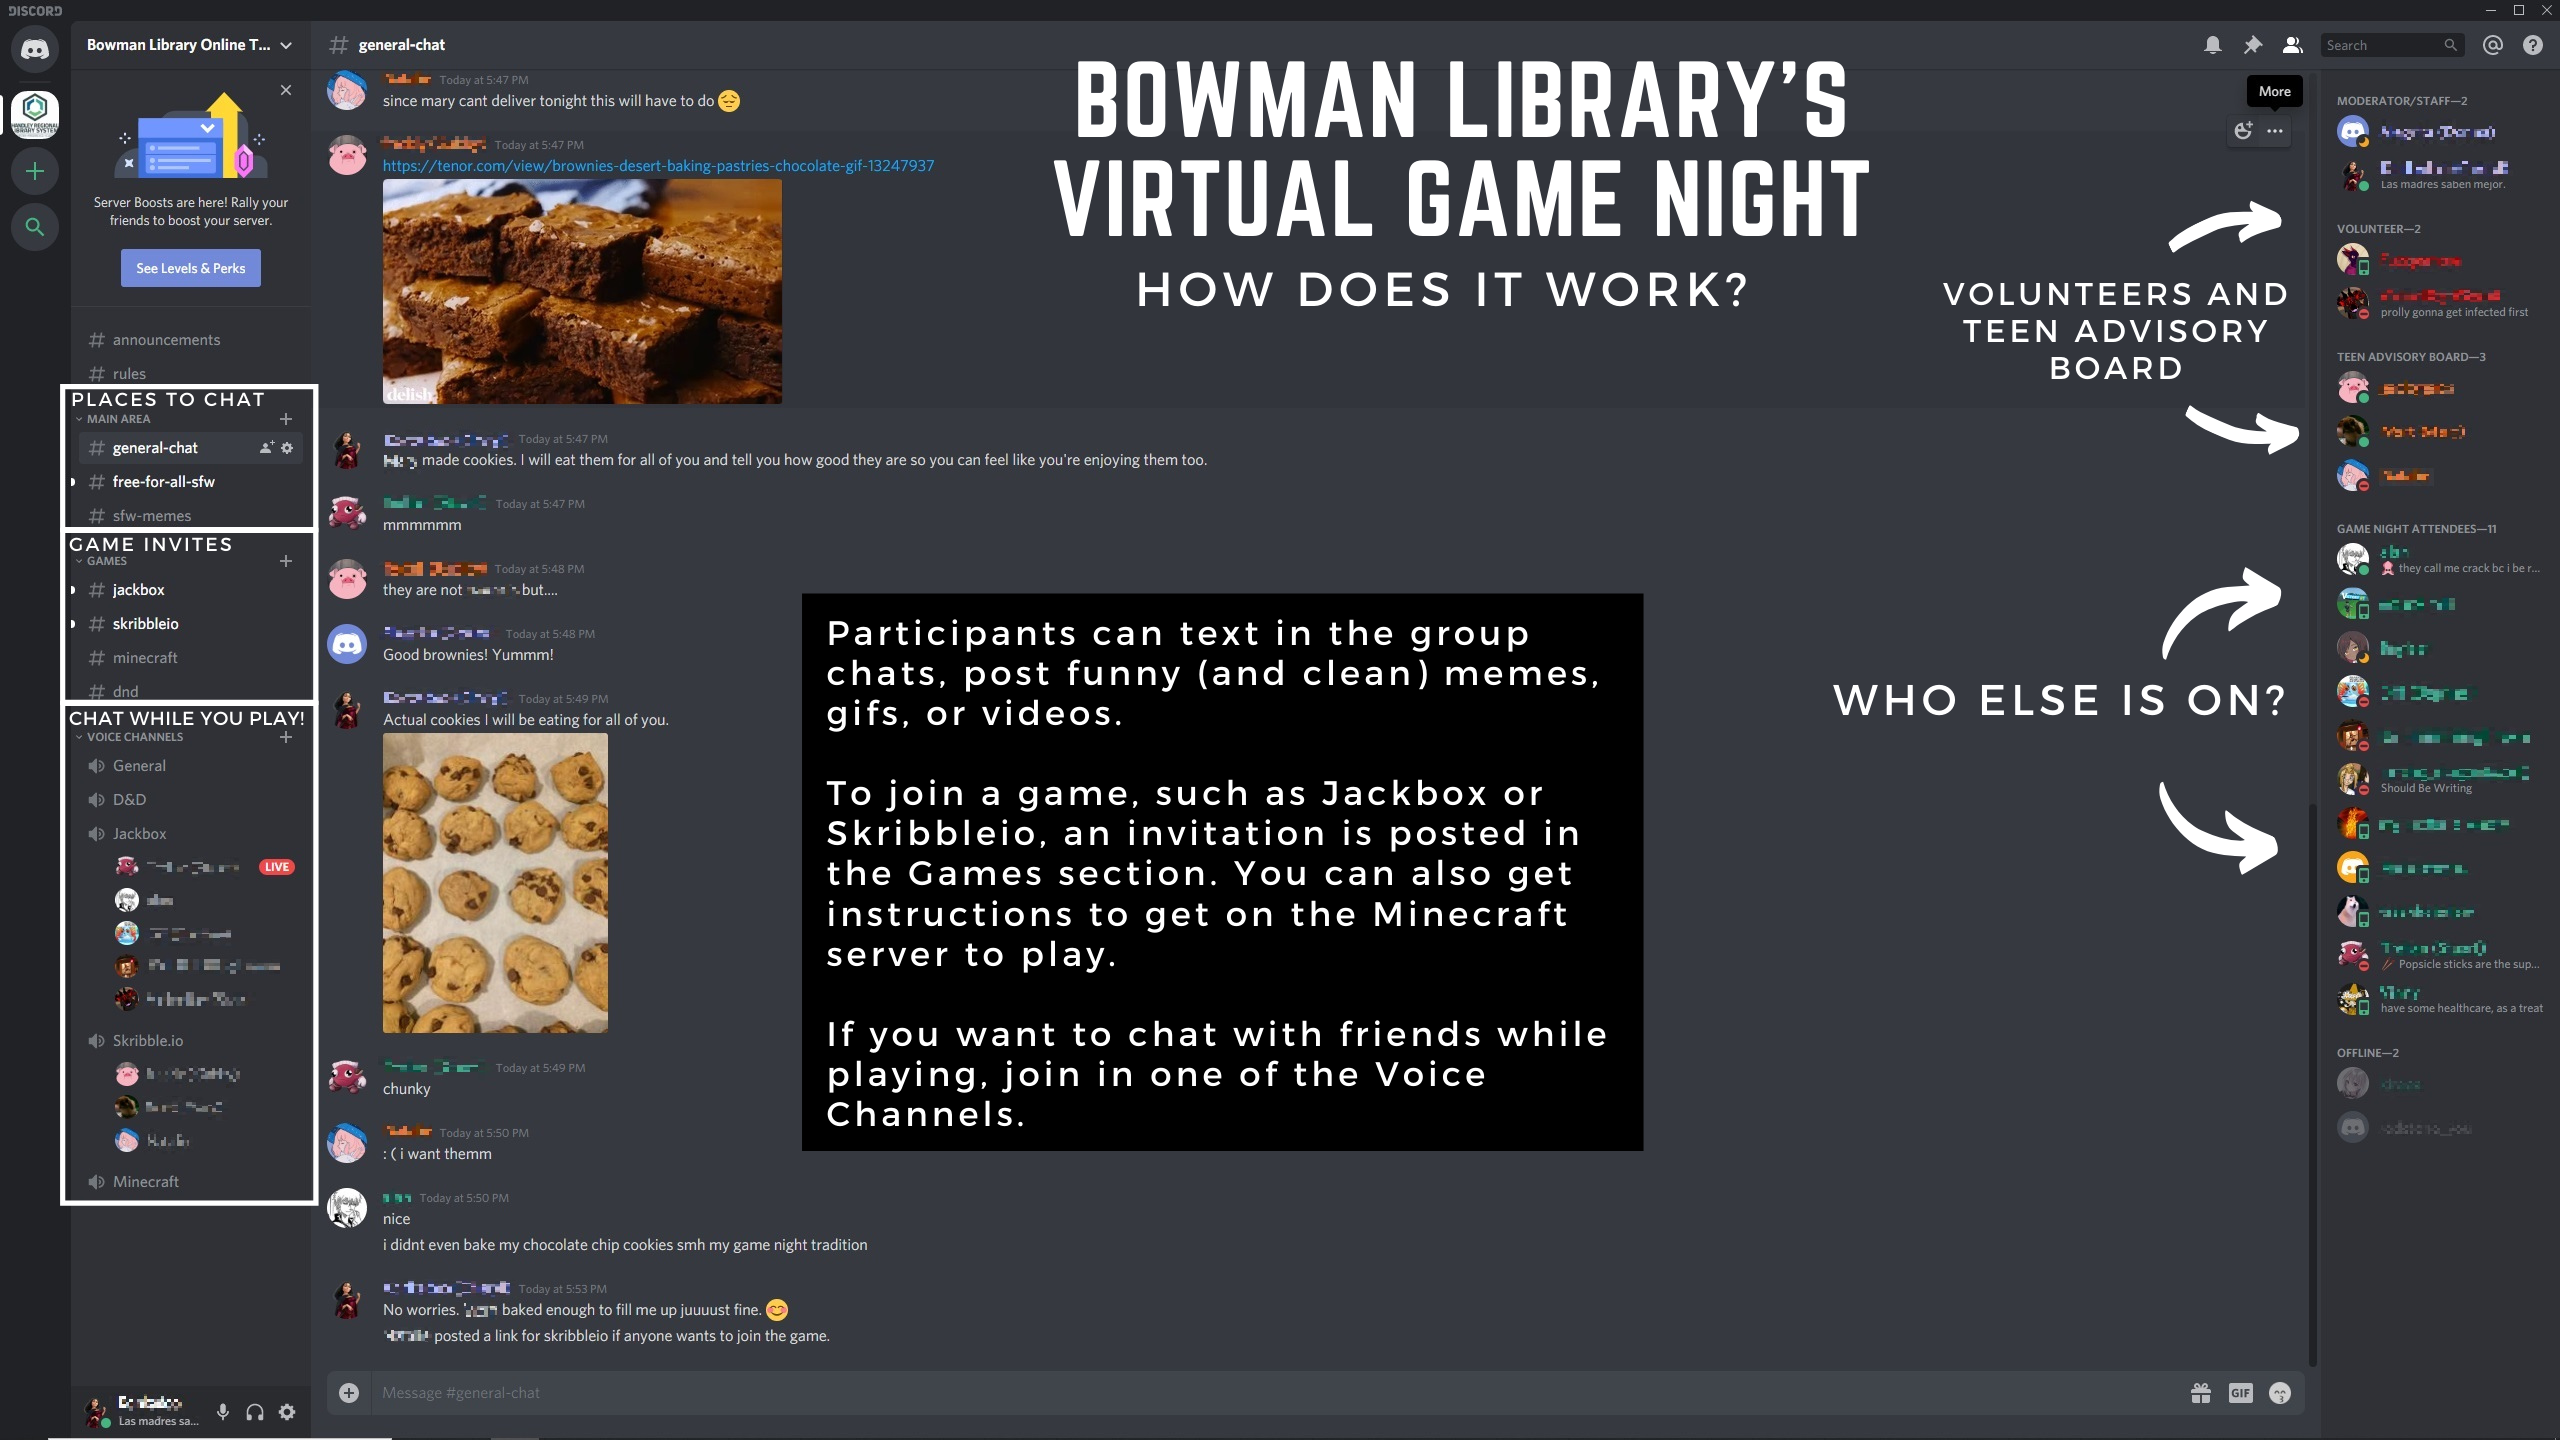 Virtual Game Night Overview